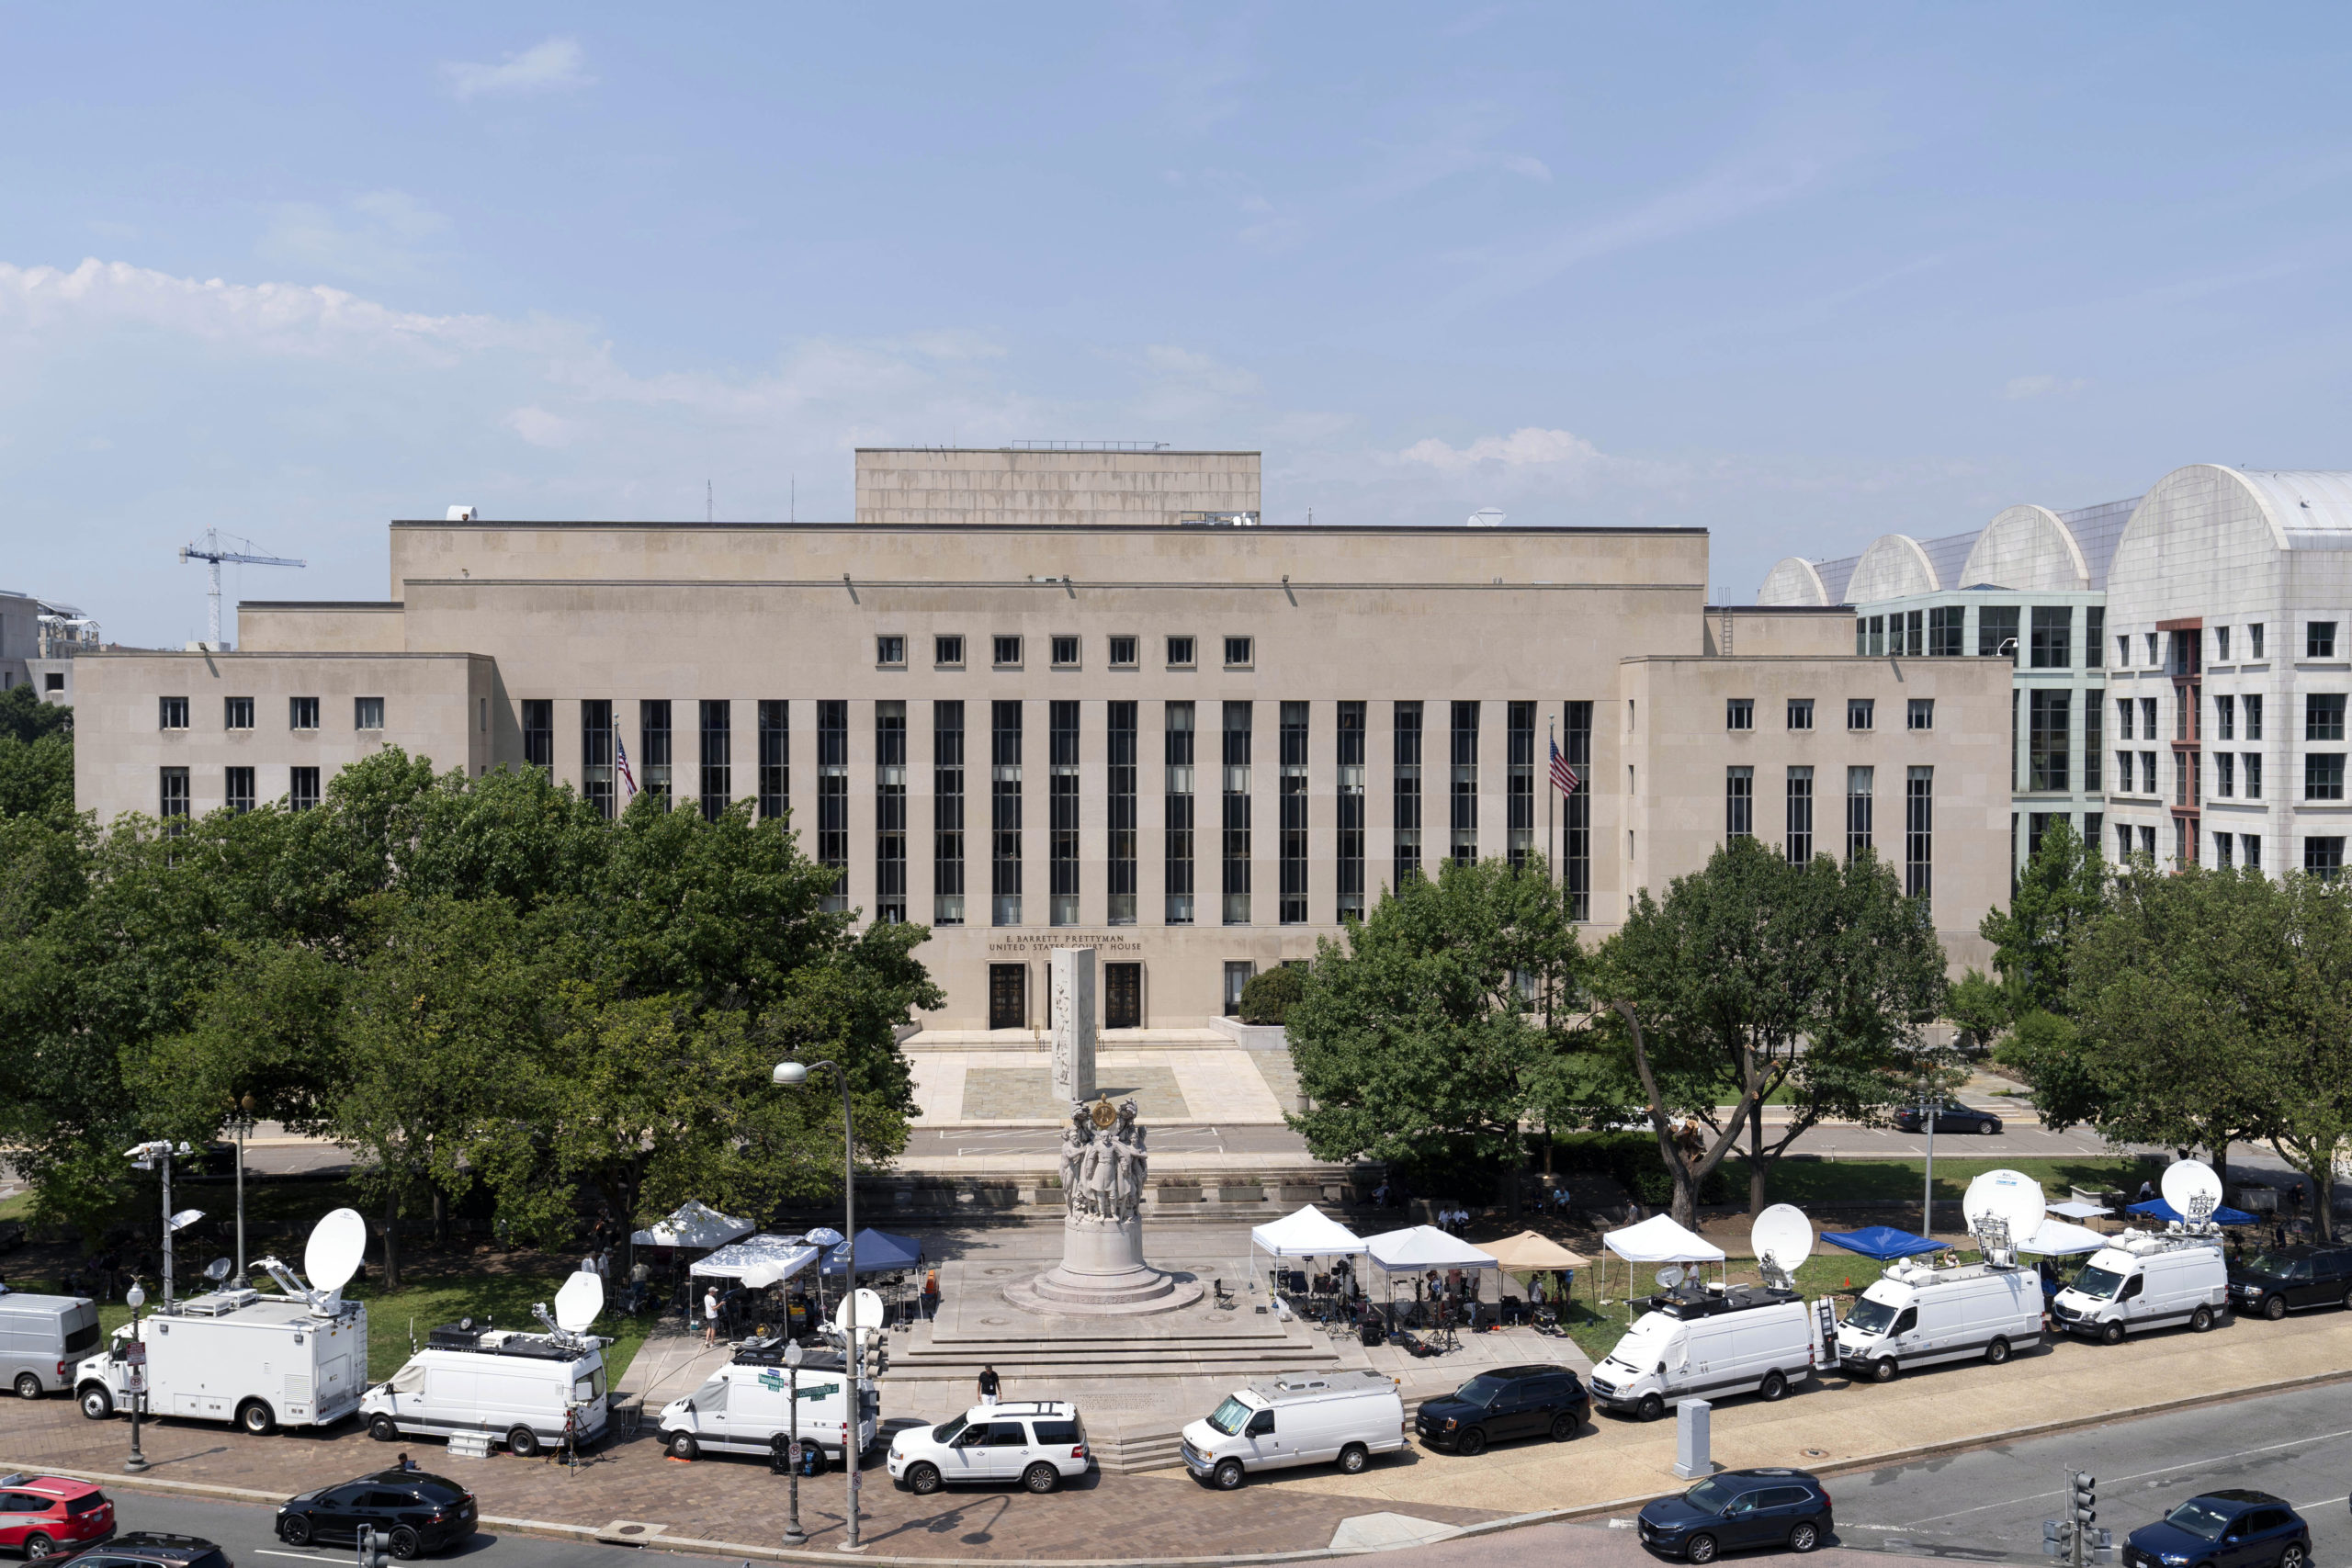 On Thursday, television news crews set up outside federal court in Washington, D.C., where a grand jury has been meeting in the probe led by special counsel Jack Smith against former President Donald Trump.